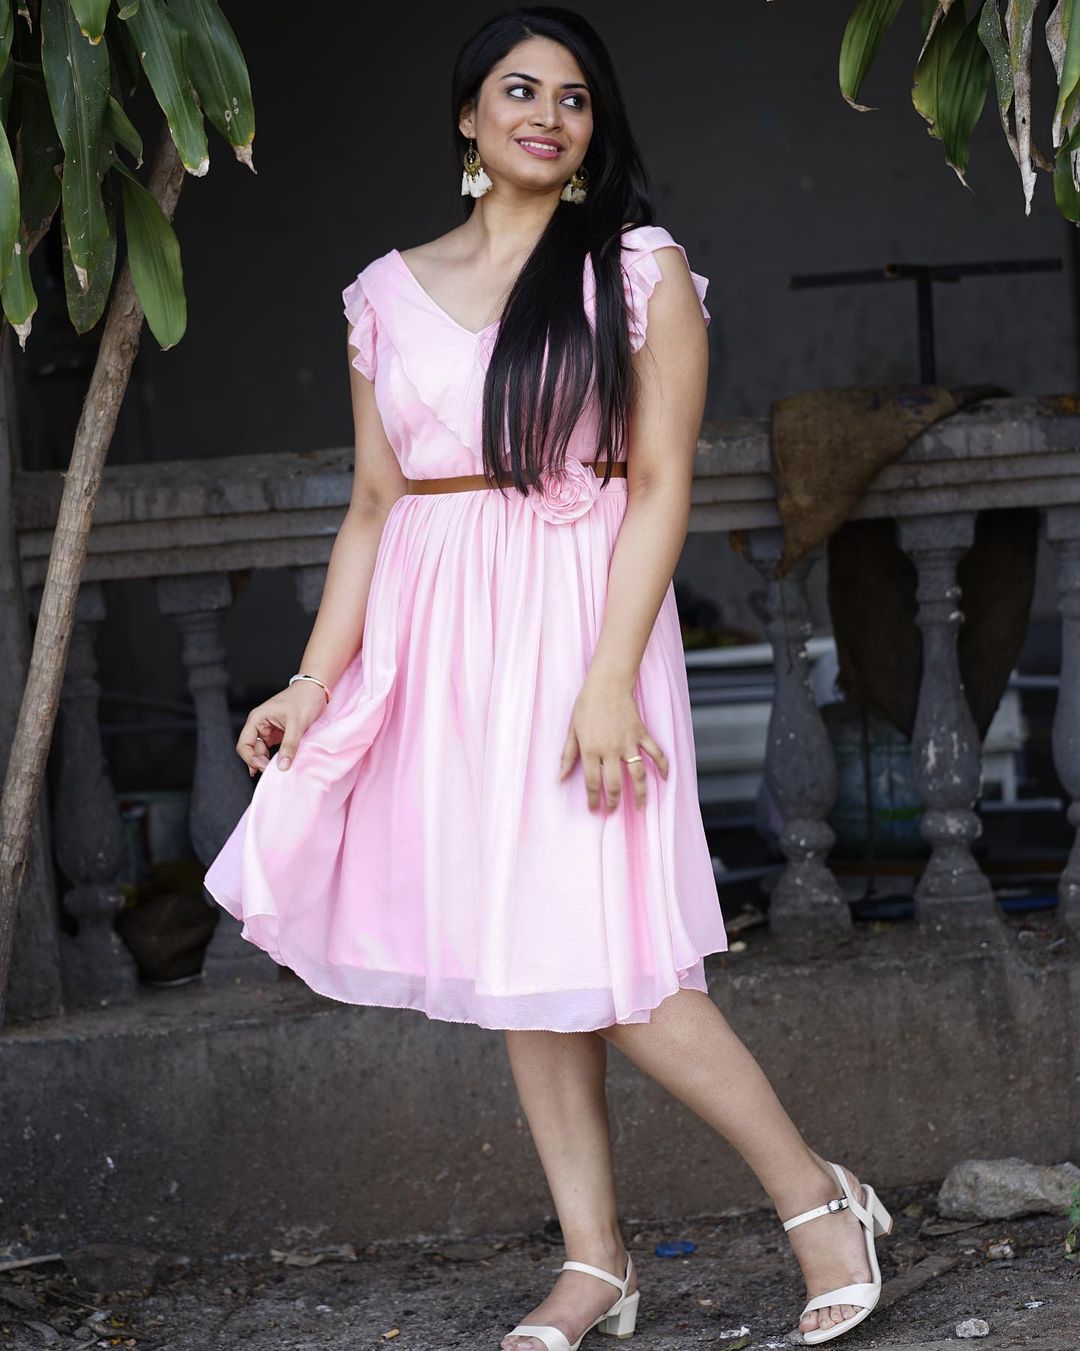 South Indian Tv Anchor Model Meghana Photoshoot In Pink Top Navel Queens 